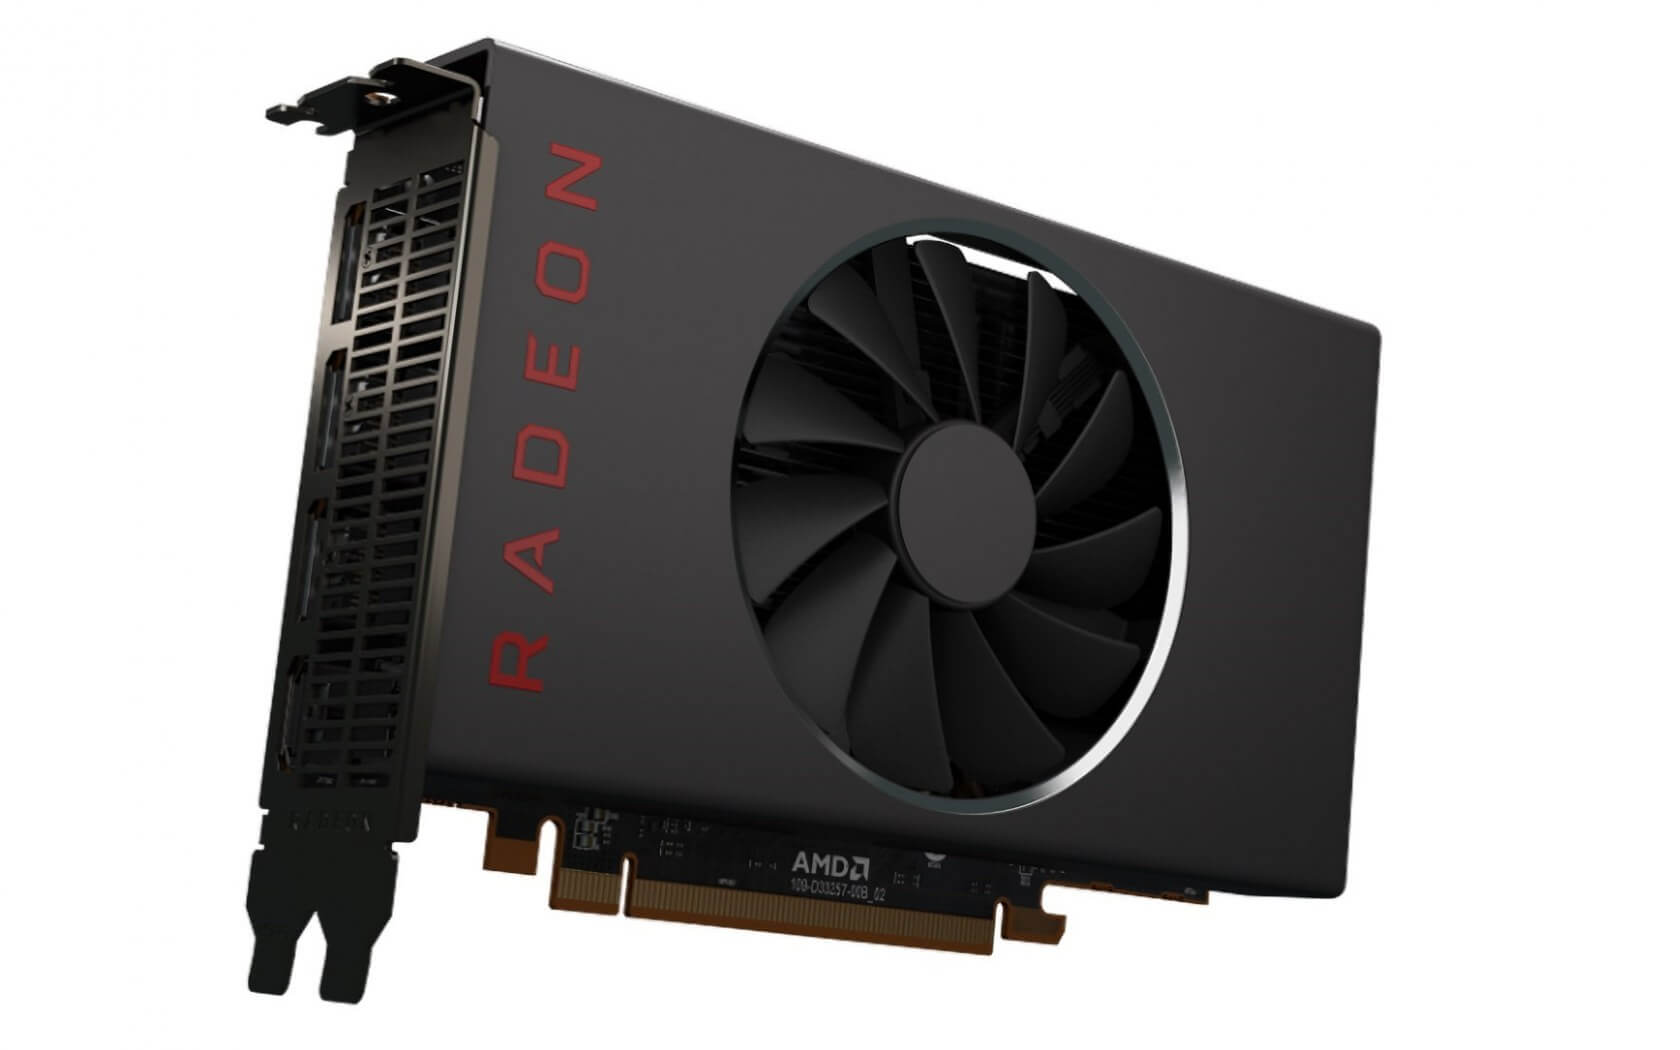 AMD: The new Radeon RX 5500 will boast 'up to' 37 percent faster performance than the GTX 1650